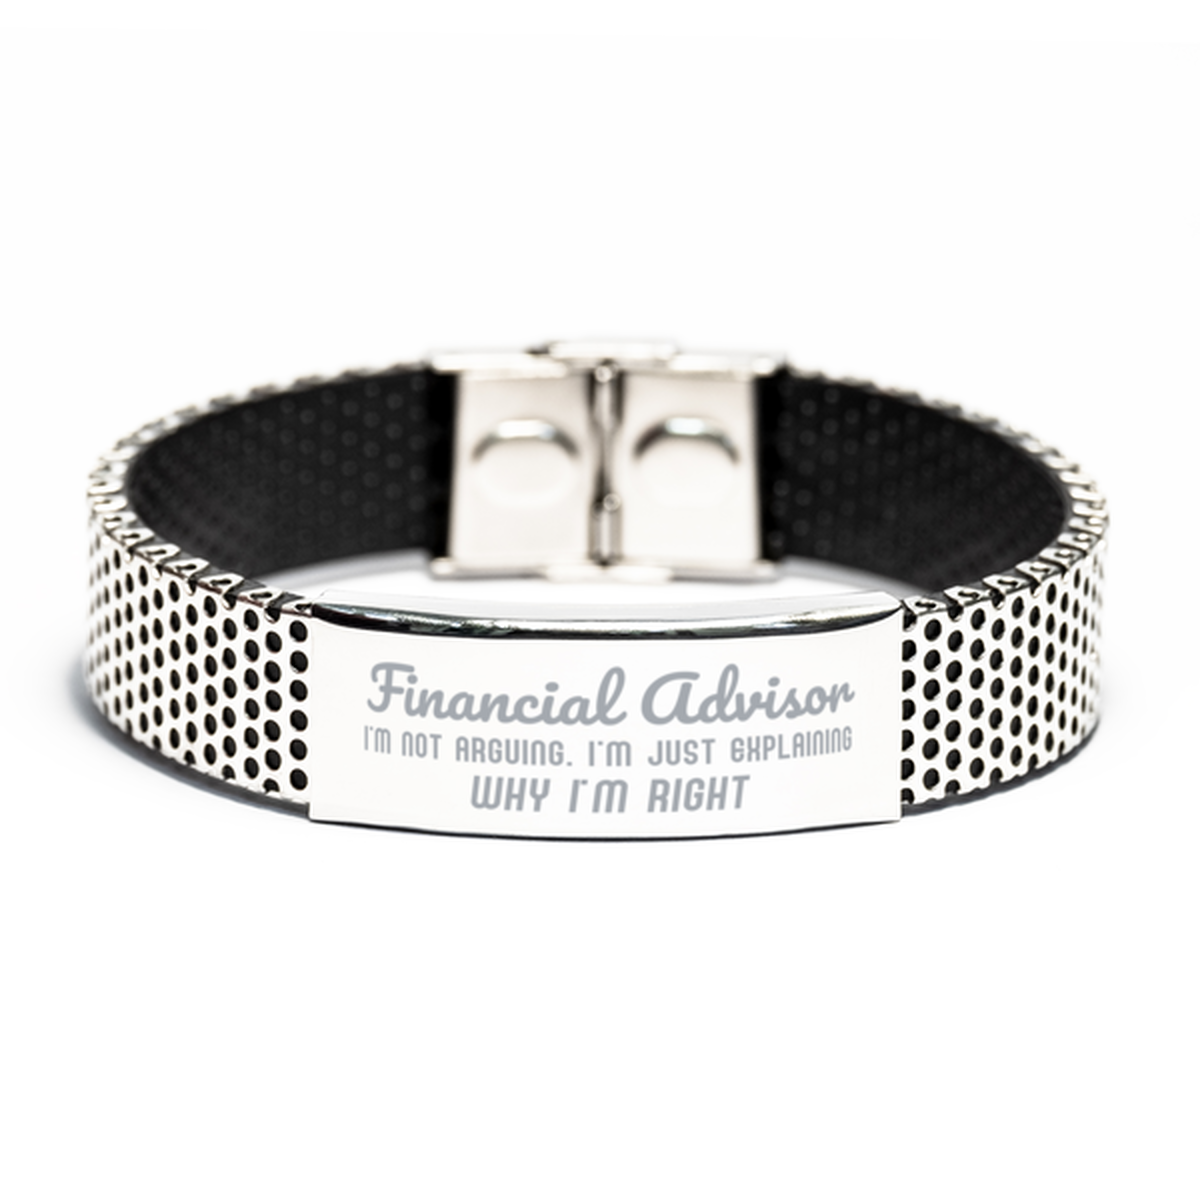 Financial Advisor I'm not Arguing. I'm Just Explaining Why I'm RIGHT Stainless Steel Bracelet, Funny Saying Quote Financial Advisor Gifts For Financial Advisor Graduation Birthday Christmas Gifts for Men Women Coworker